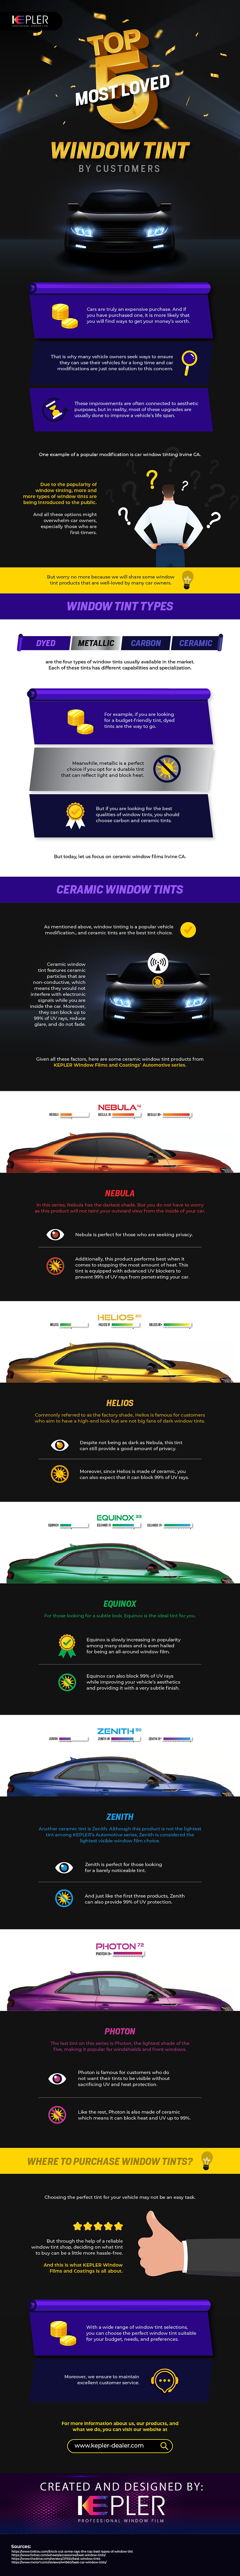 Top 5 Most Loved Window Tint by Customers - Infographic